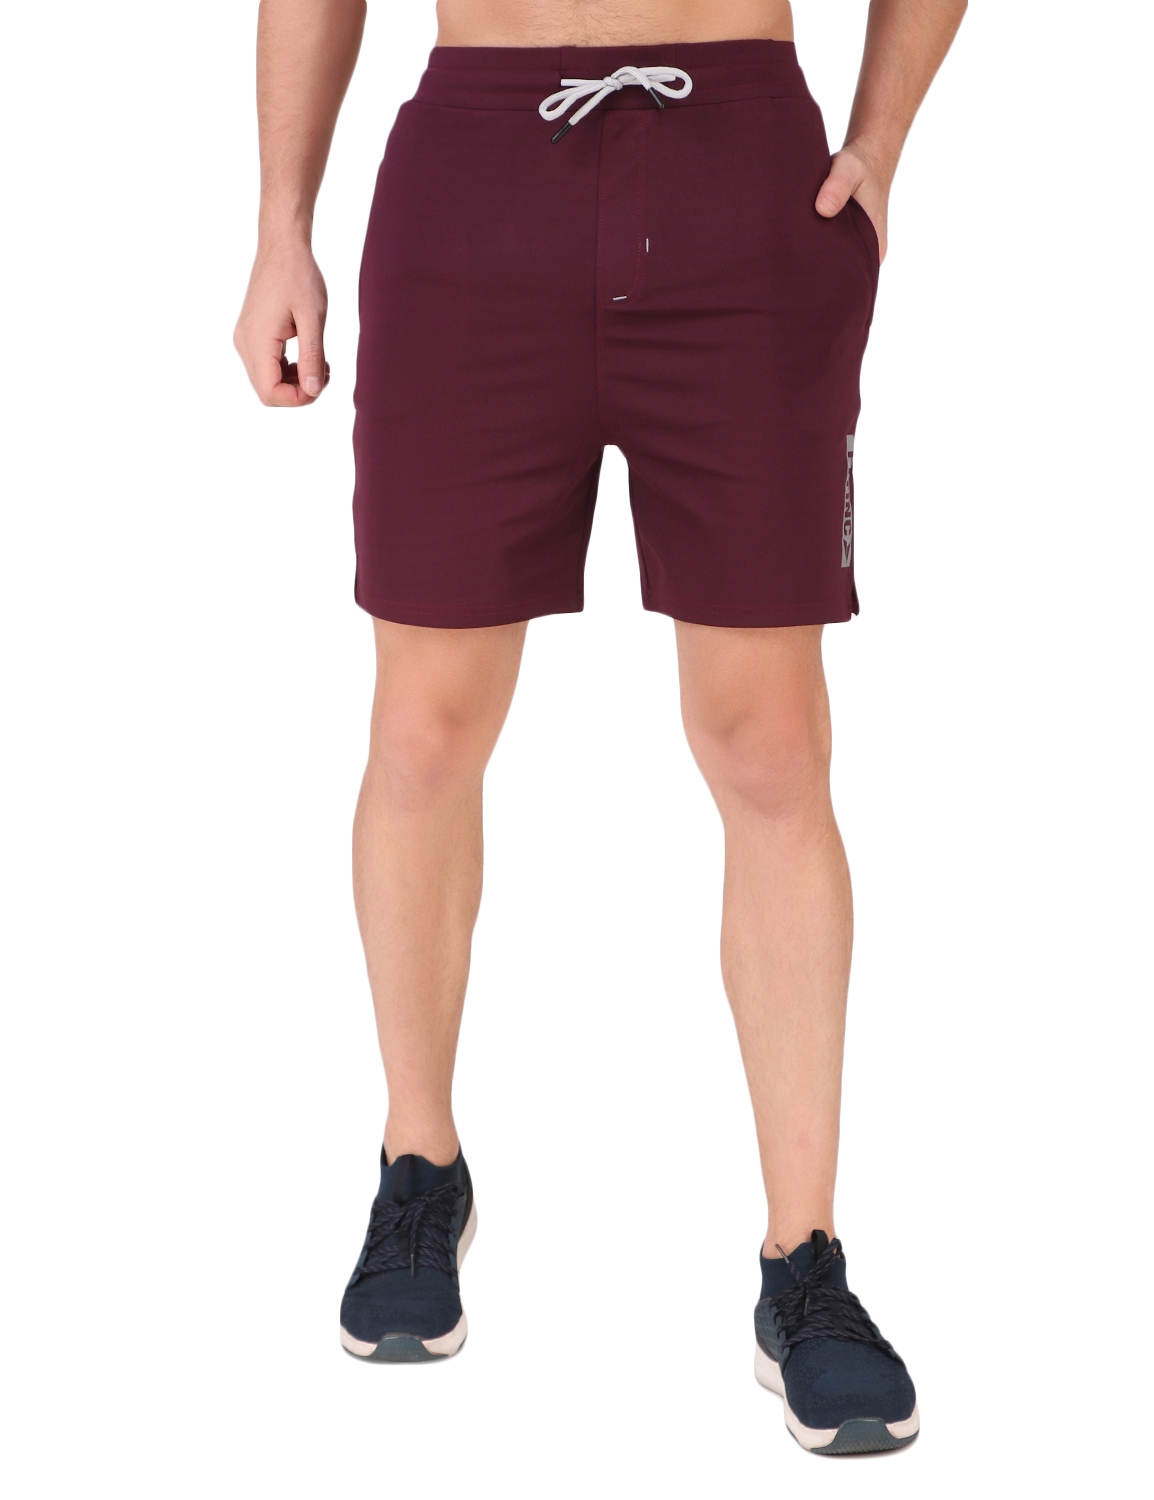 Fitinc Stretchable Men's Maroon Shorts for Gym, Running, Jogging, Yoga, Cycling, and Active Sports